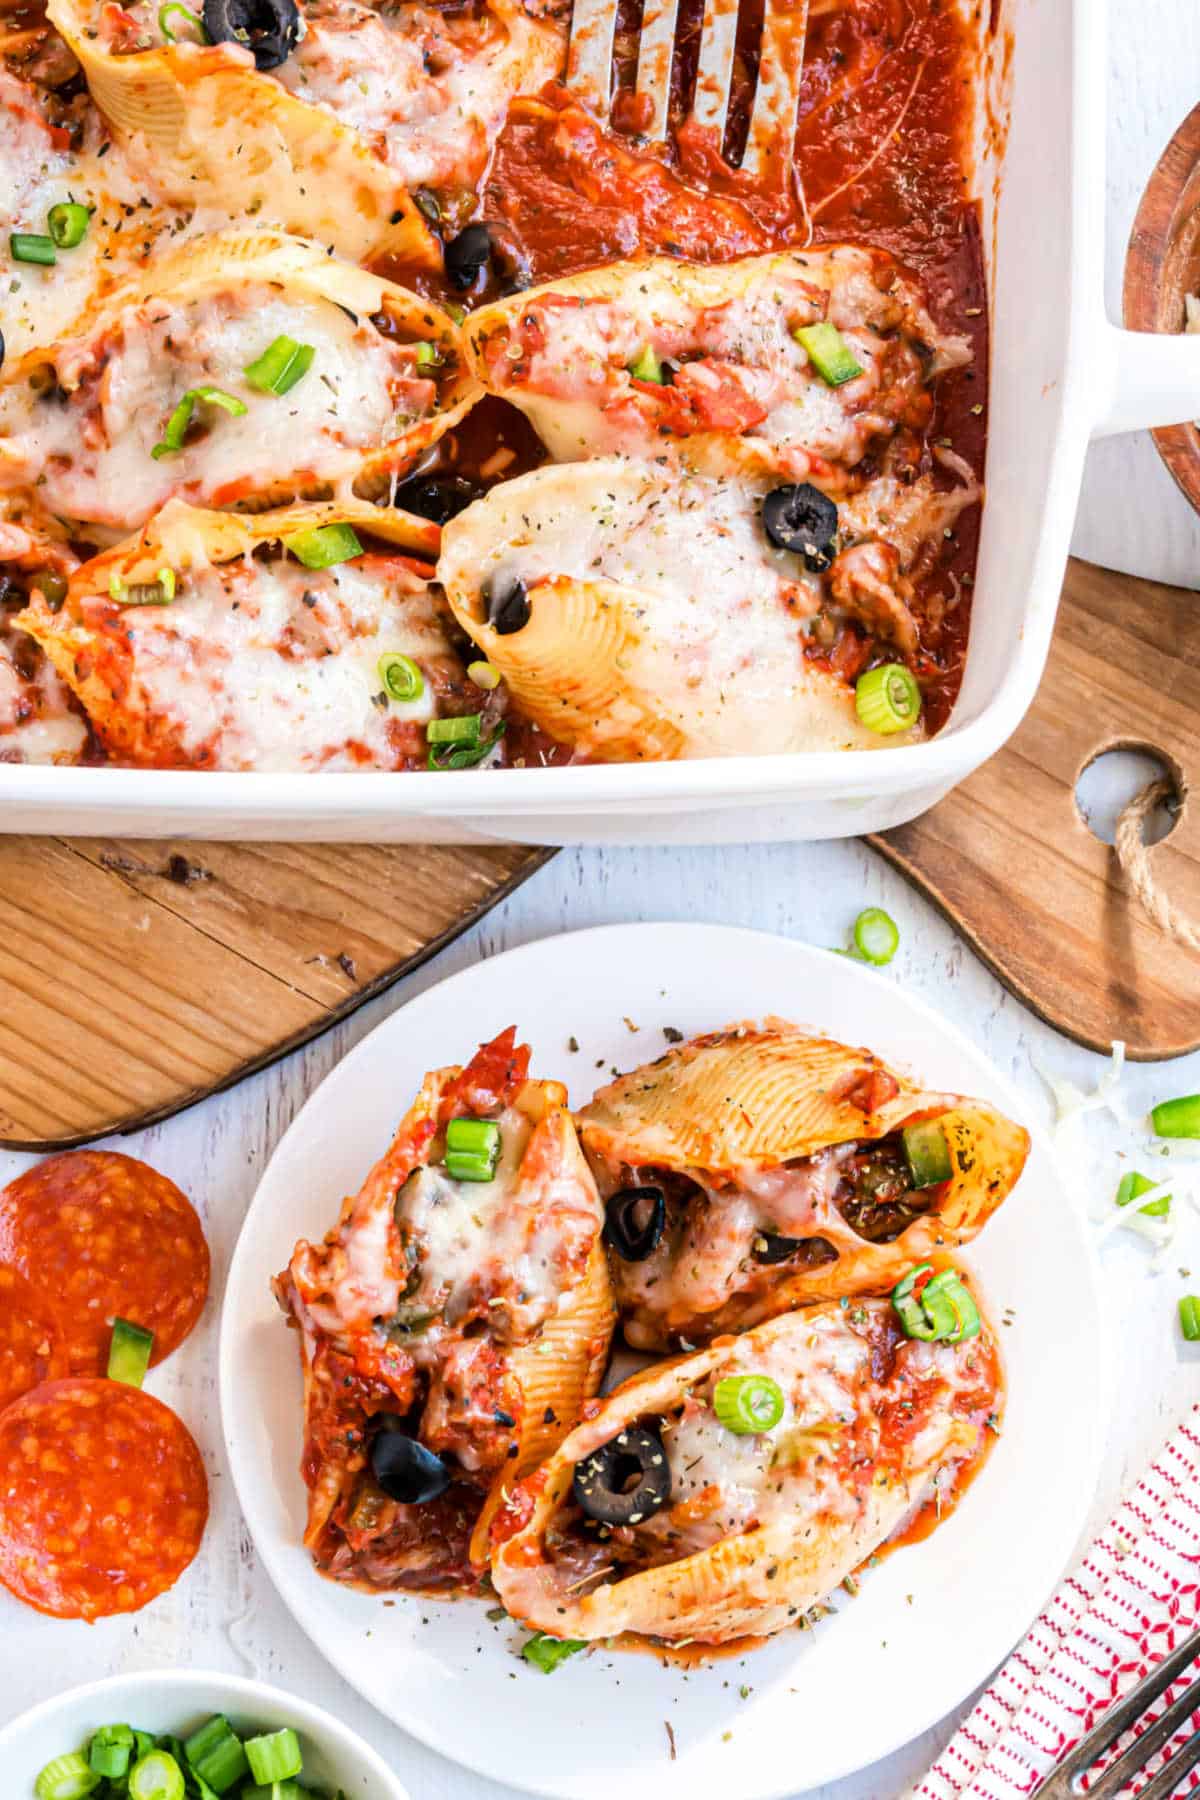 Pasta shells stuffed with pizza sauce and toppings.